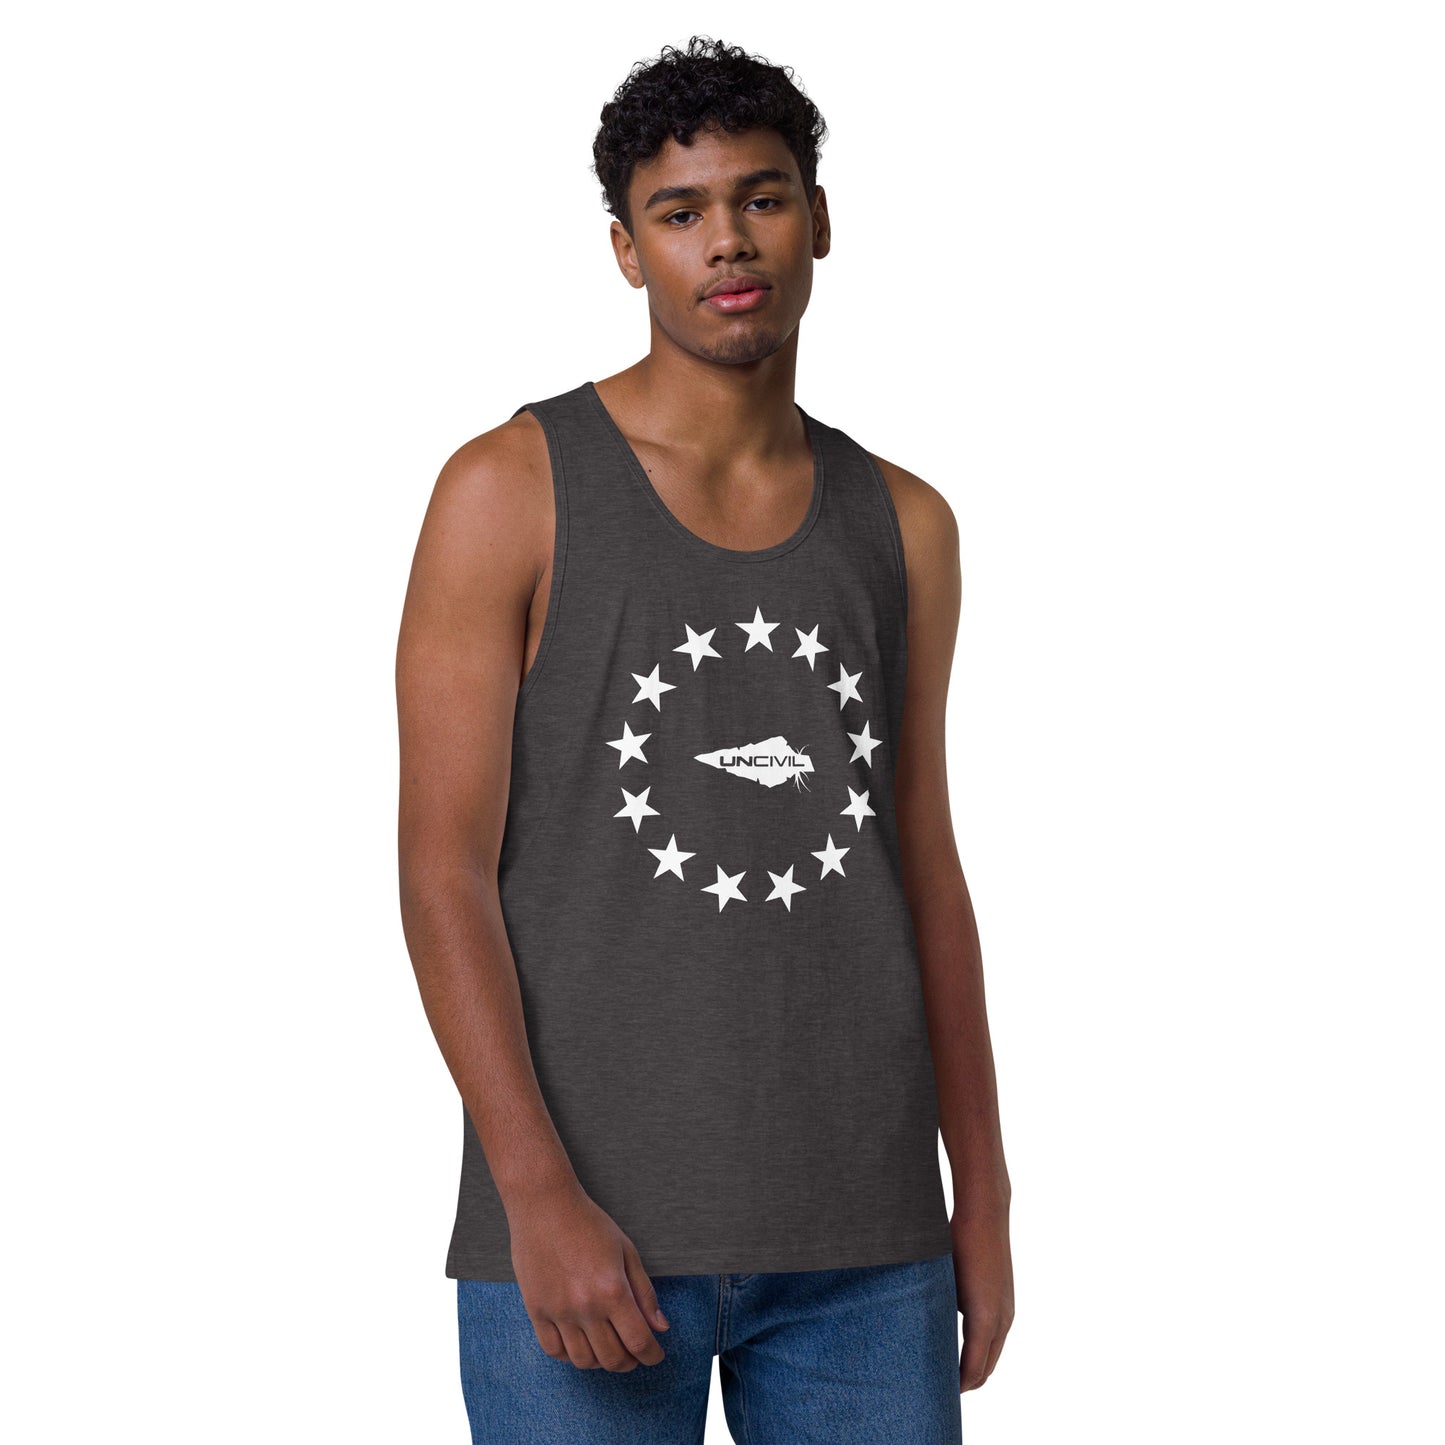 Betsy Ross men's tank top. Featuring the iconic 13 stars design, this tank is perfect for anyone who loves America and its rich history. Grey and white.